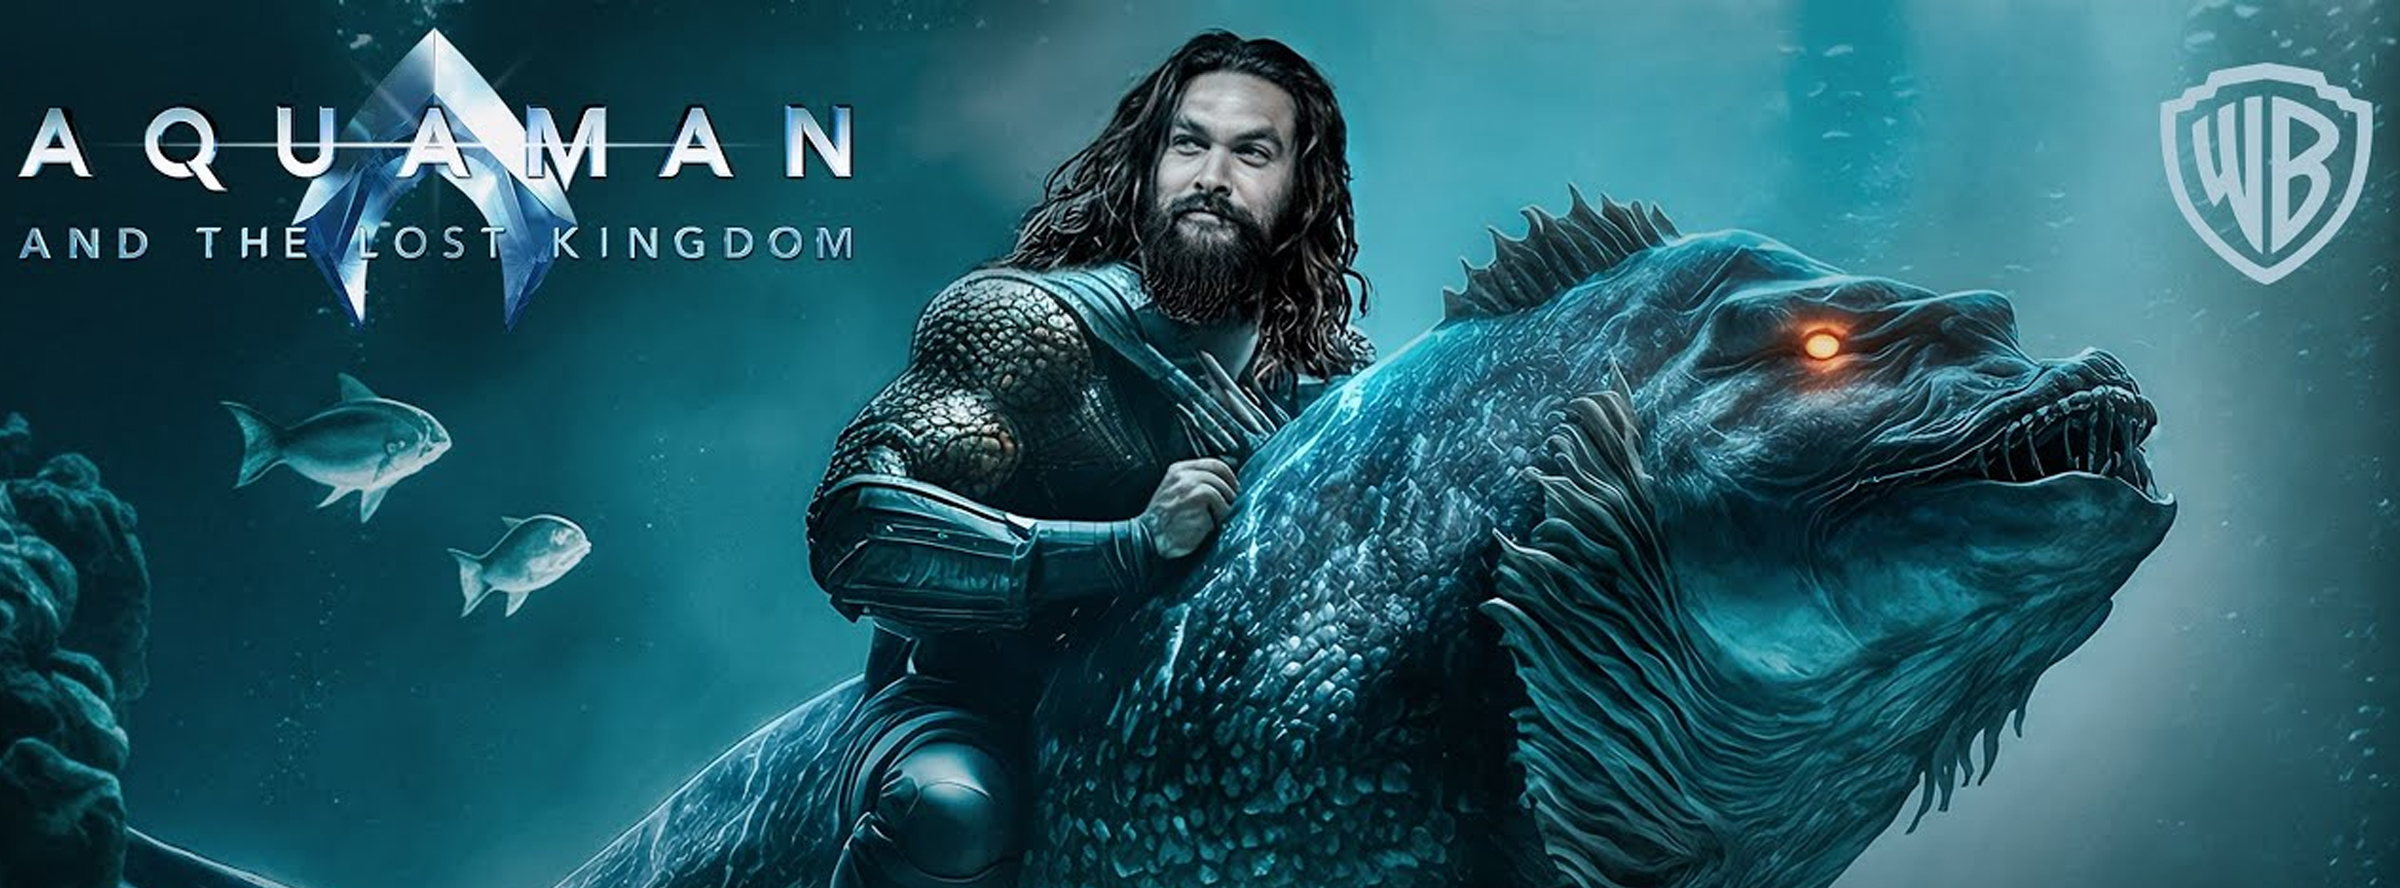 Slider Image for Aquaman and The Lost Kingdom